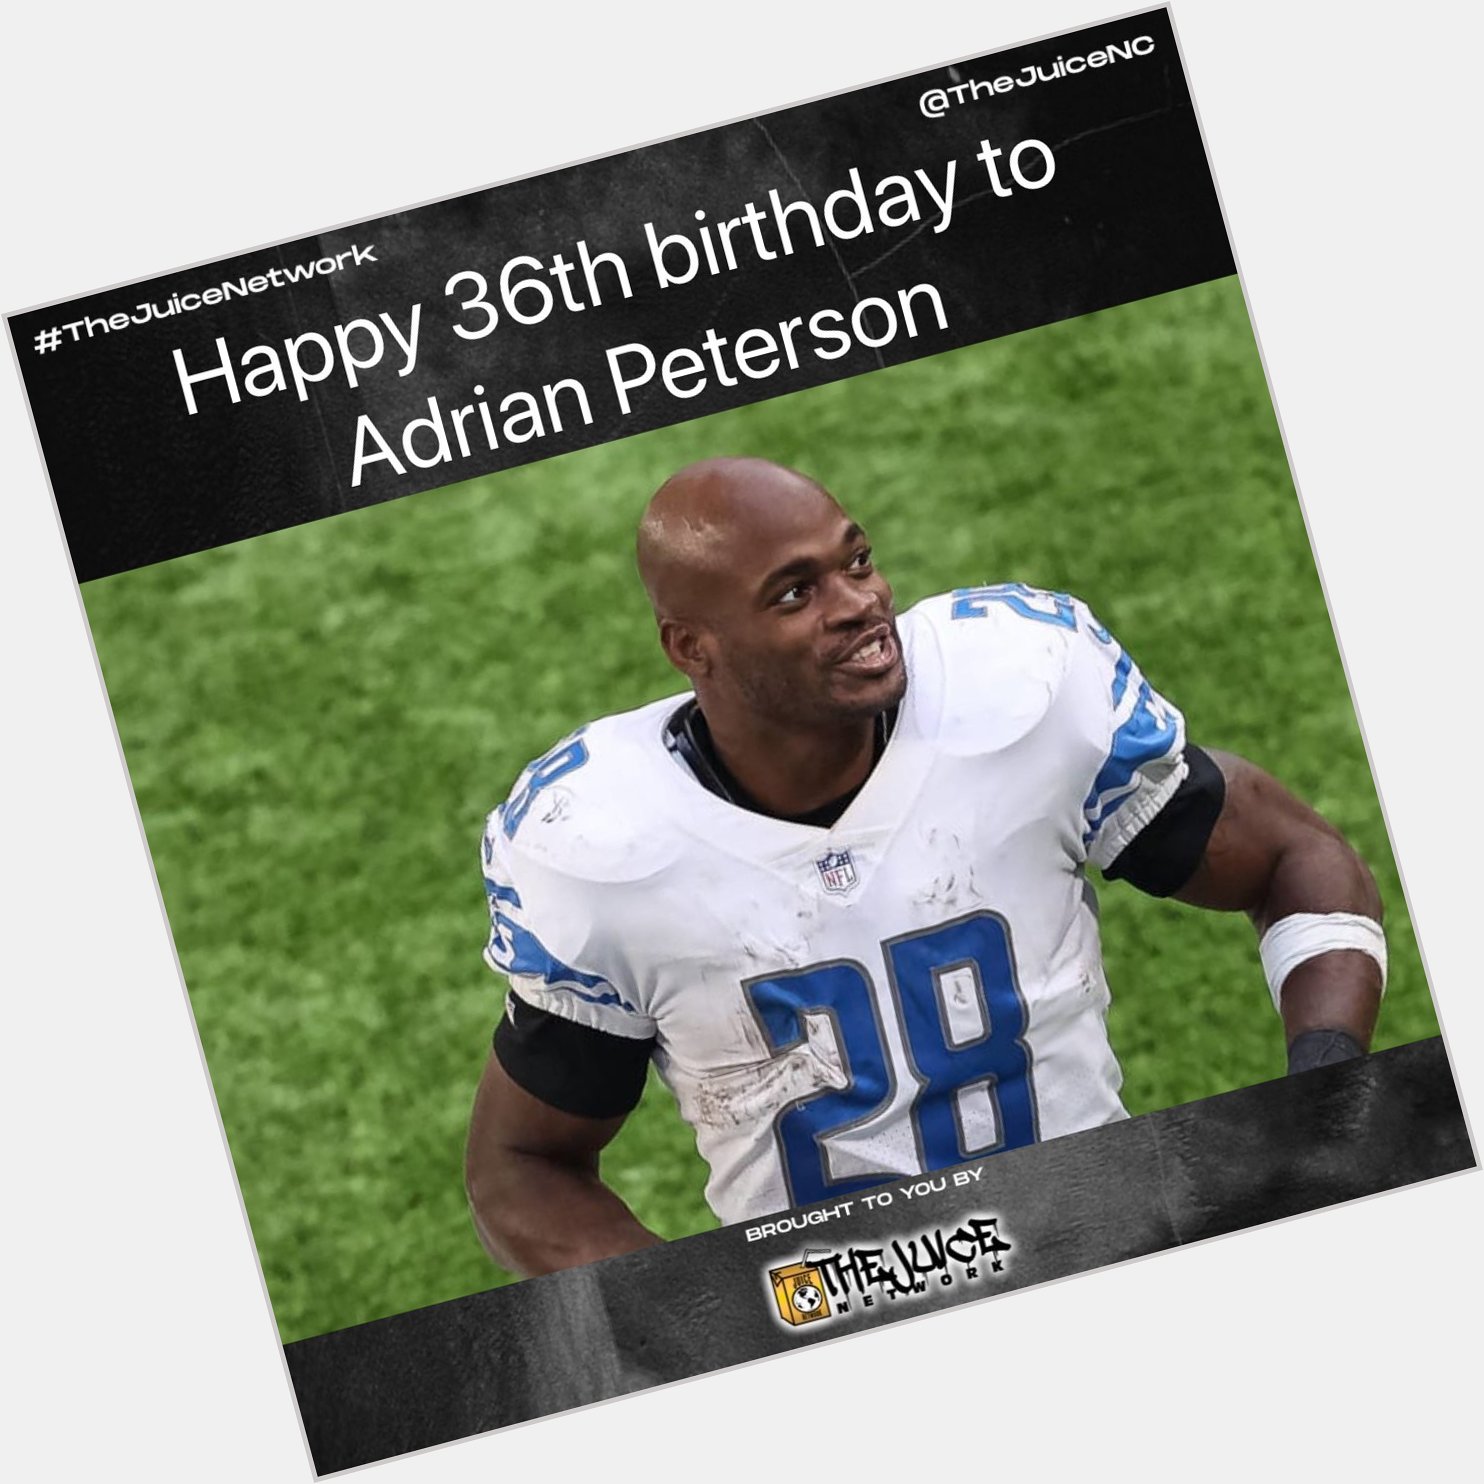 Happy 36th birthday to you Adrian Peterson!    